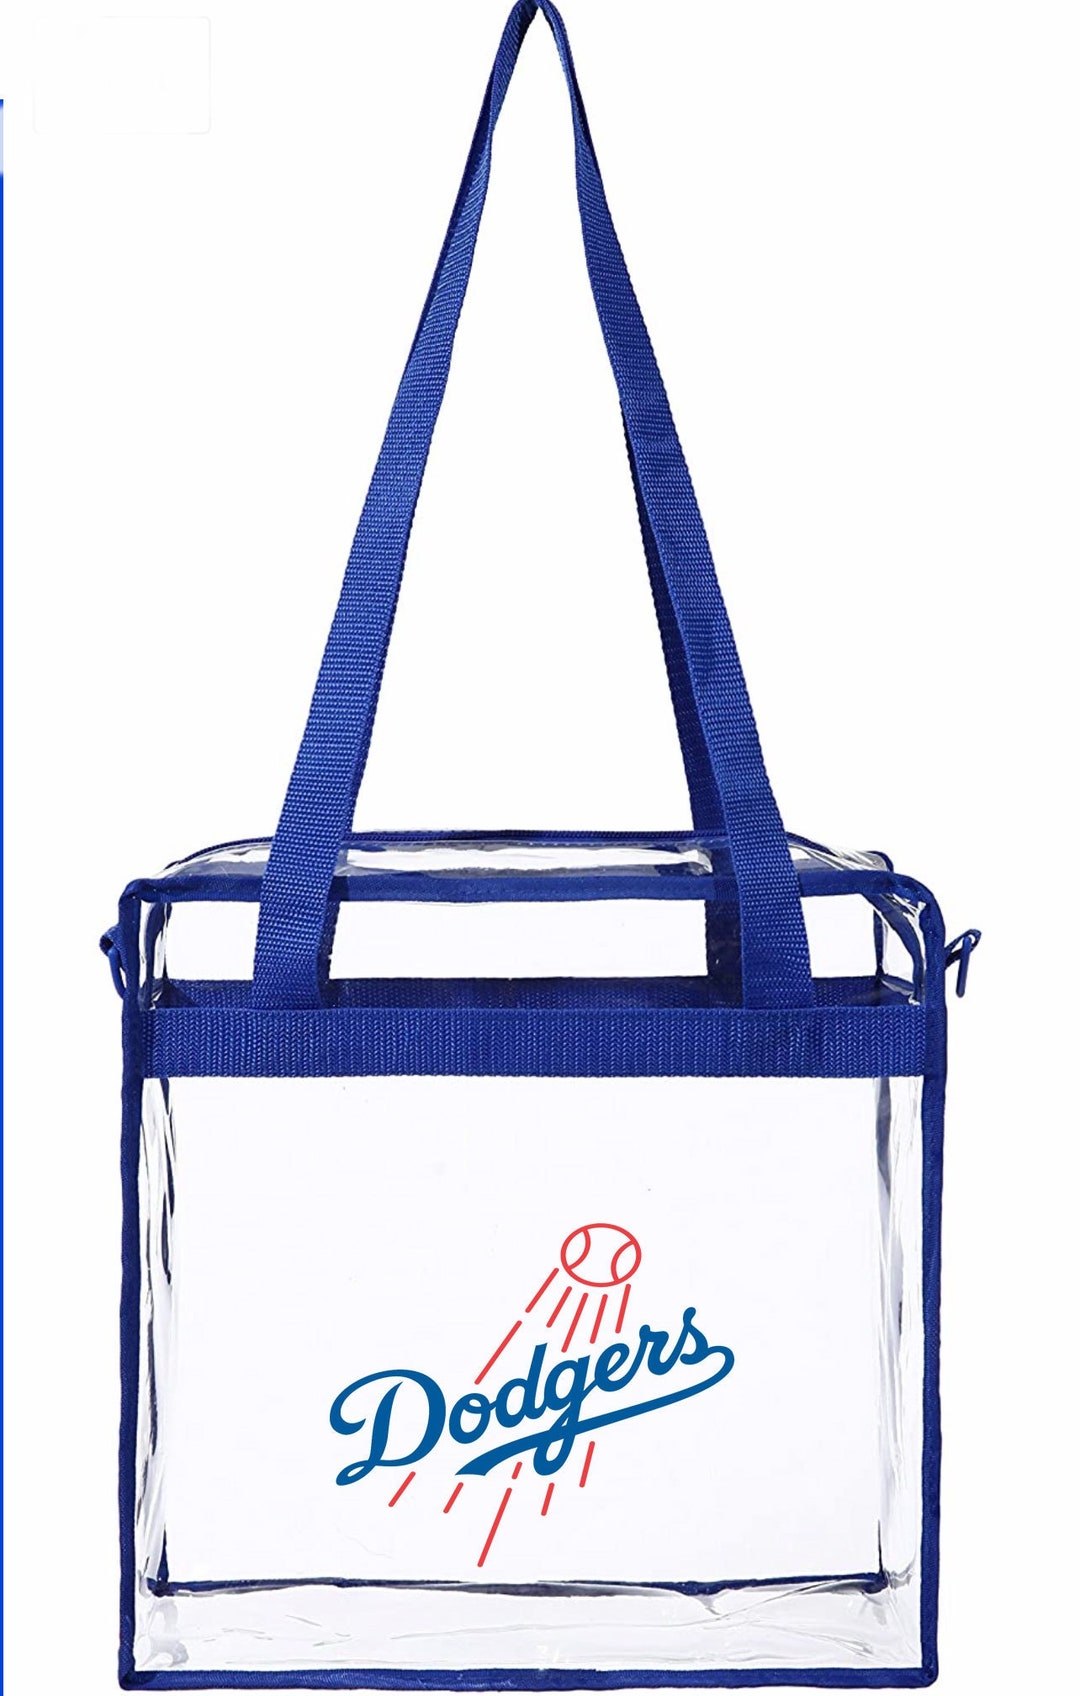 Dodger Stadium bag sizes for non clear bags｜TikTok Search